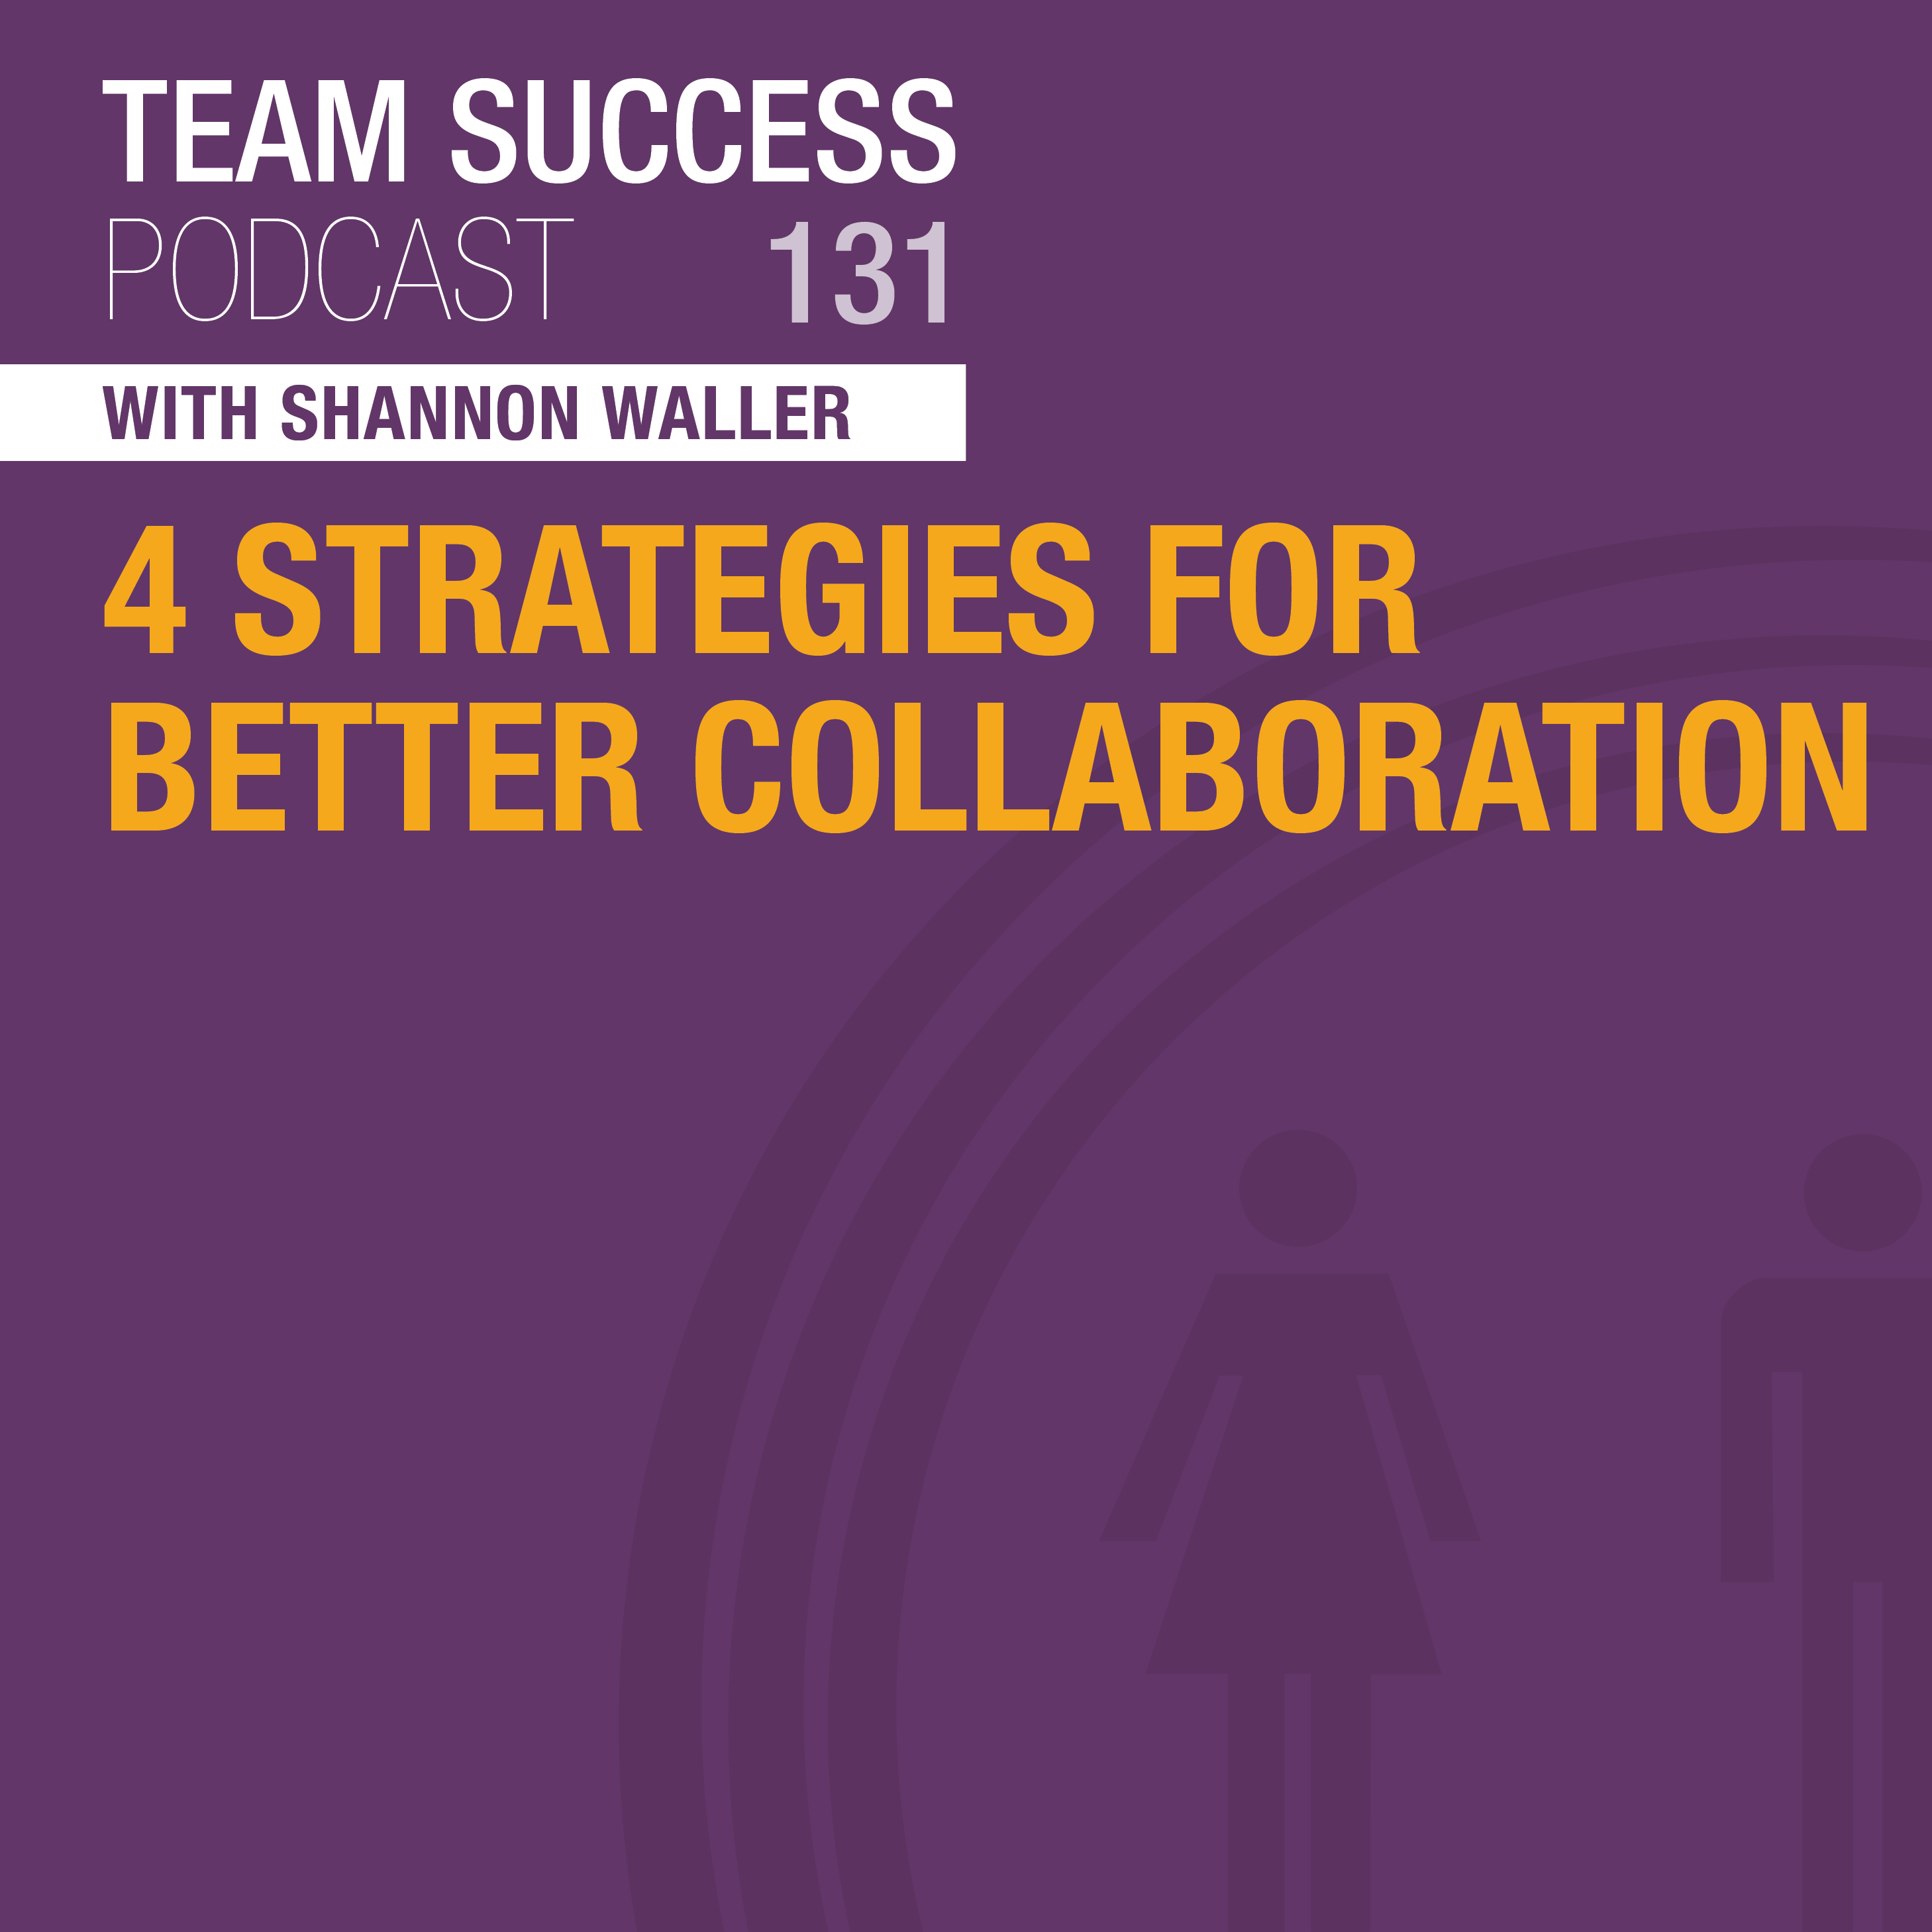 4 Strategies For Better Collaboration - Team Success Podcast